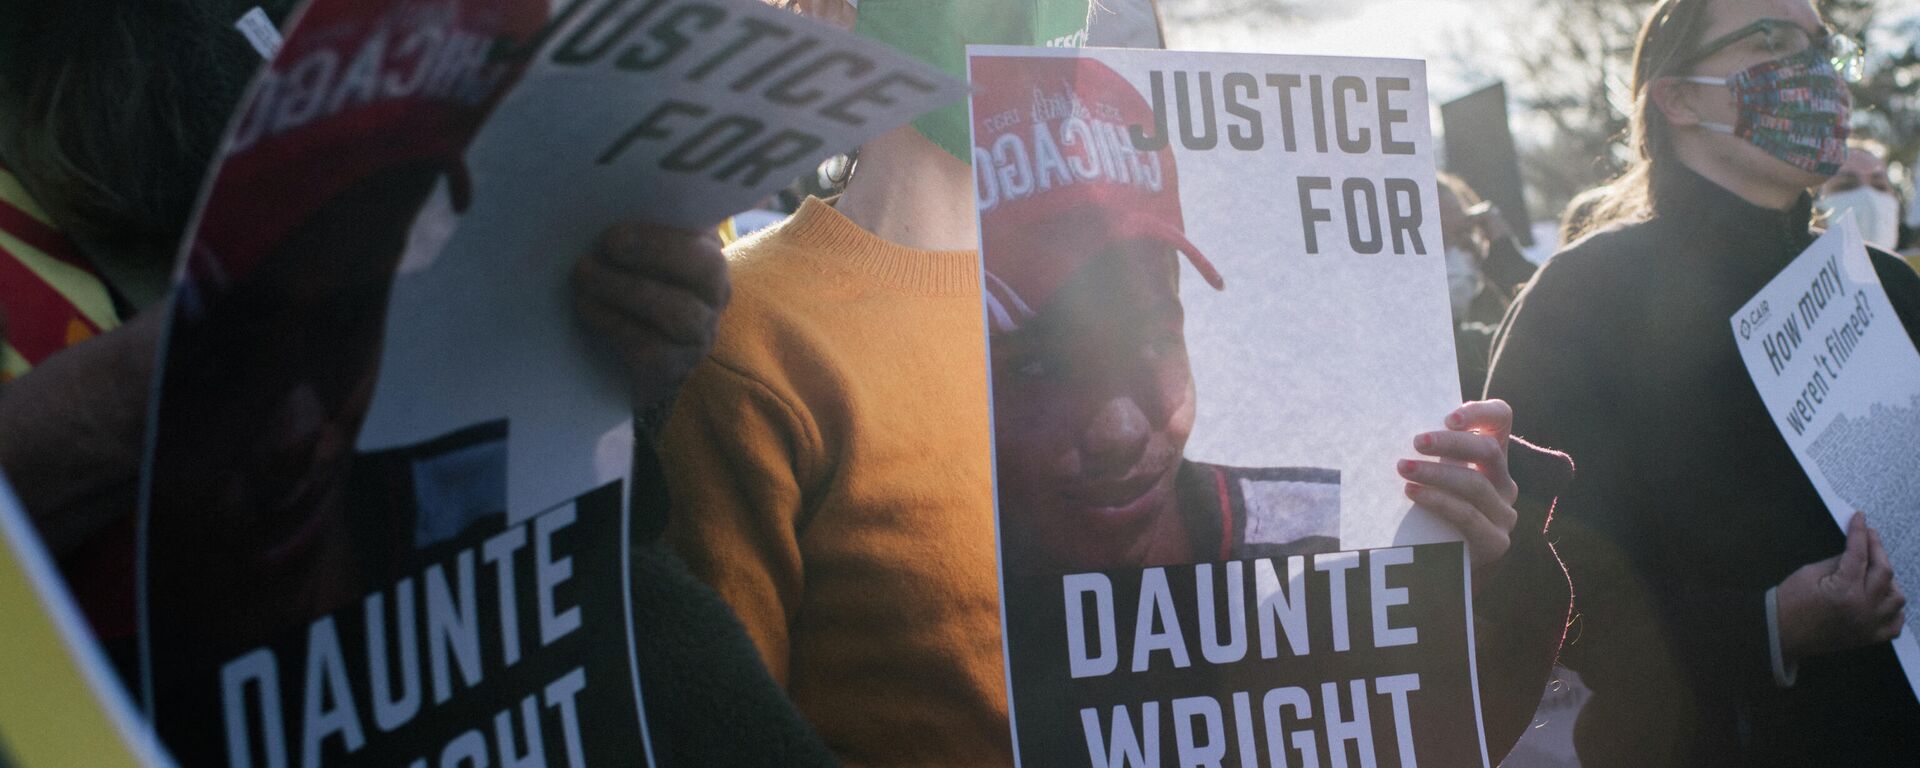 People hold signs of Daunte Wright during a demonstration on April 17, 2021 in Stillwater, Minnesota. People rallied in front of Washington County Attorney Pete Orputs home demanding murder charges be brought against former officer Kimberly Potter in the death of Daunte Wright. Protests and demonstrations continue around Minneapolis and near the Brooklyn Center following the fatal shooting of 20-year-old Daunte Wright by Brooklyn Center police officer Kimberly Potter. - Sputnik International, 1920, 08.12.2021